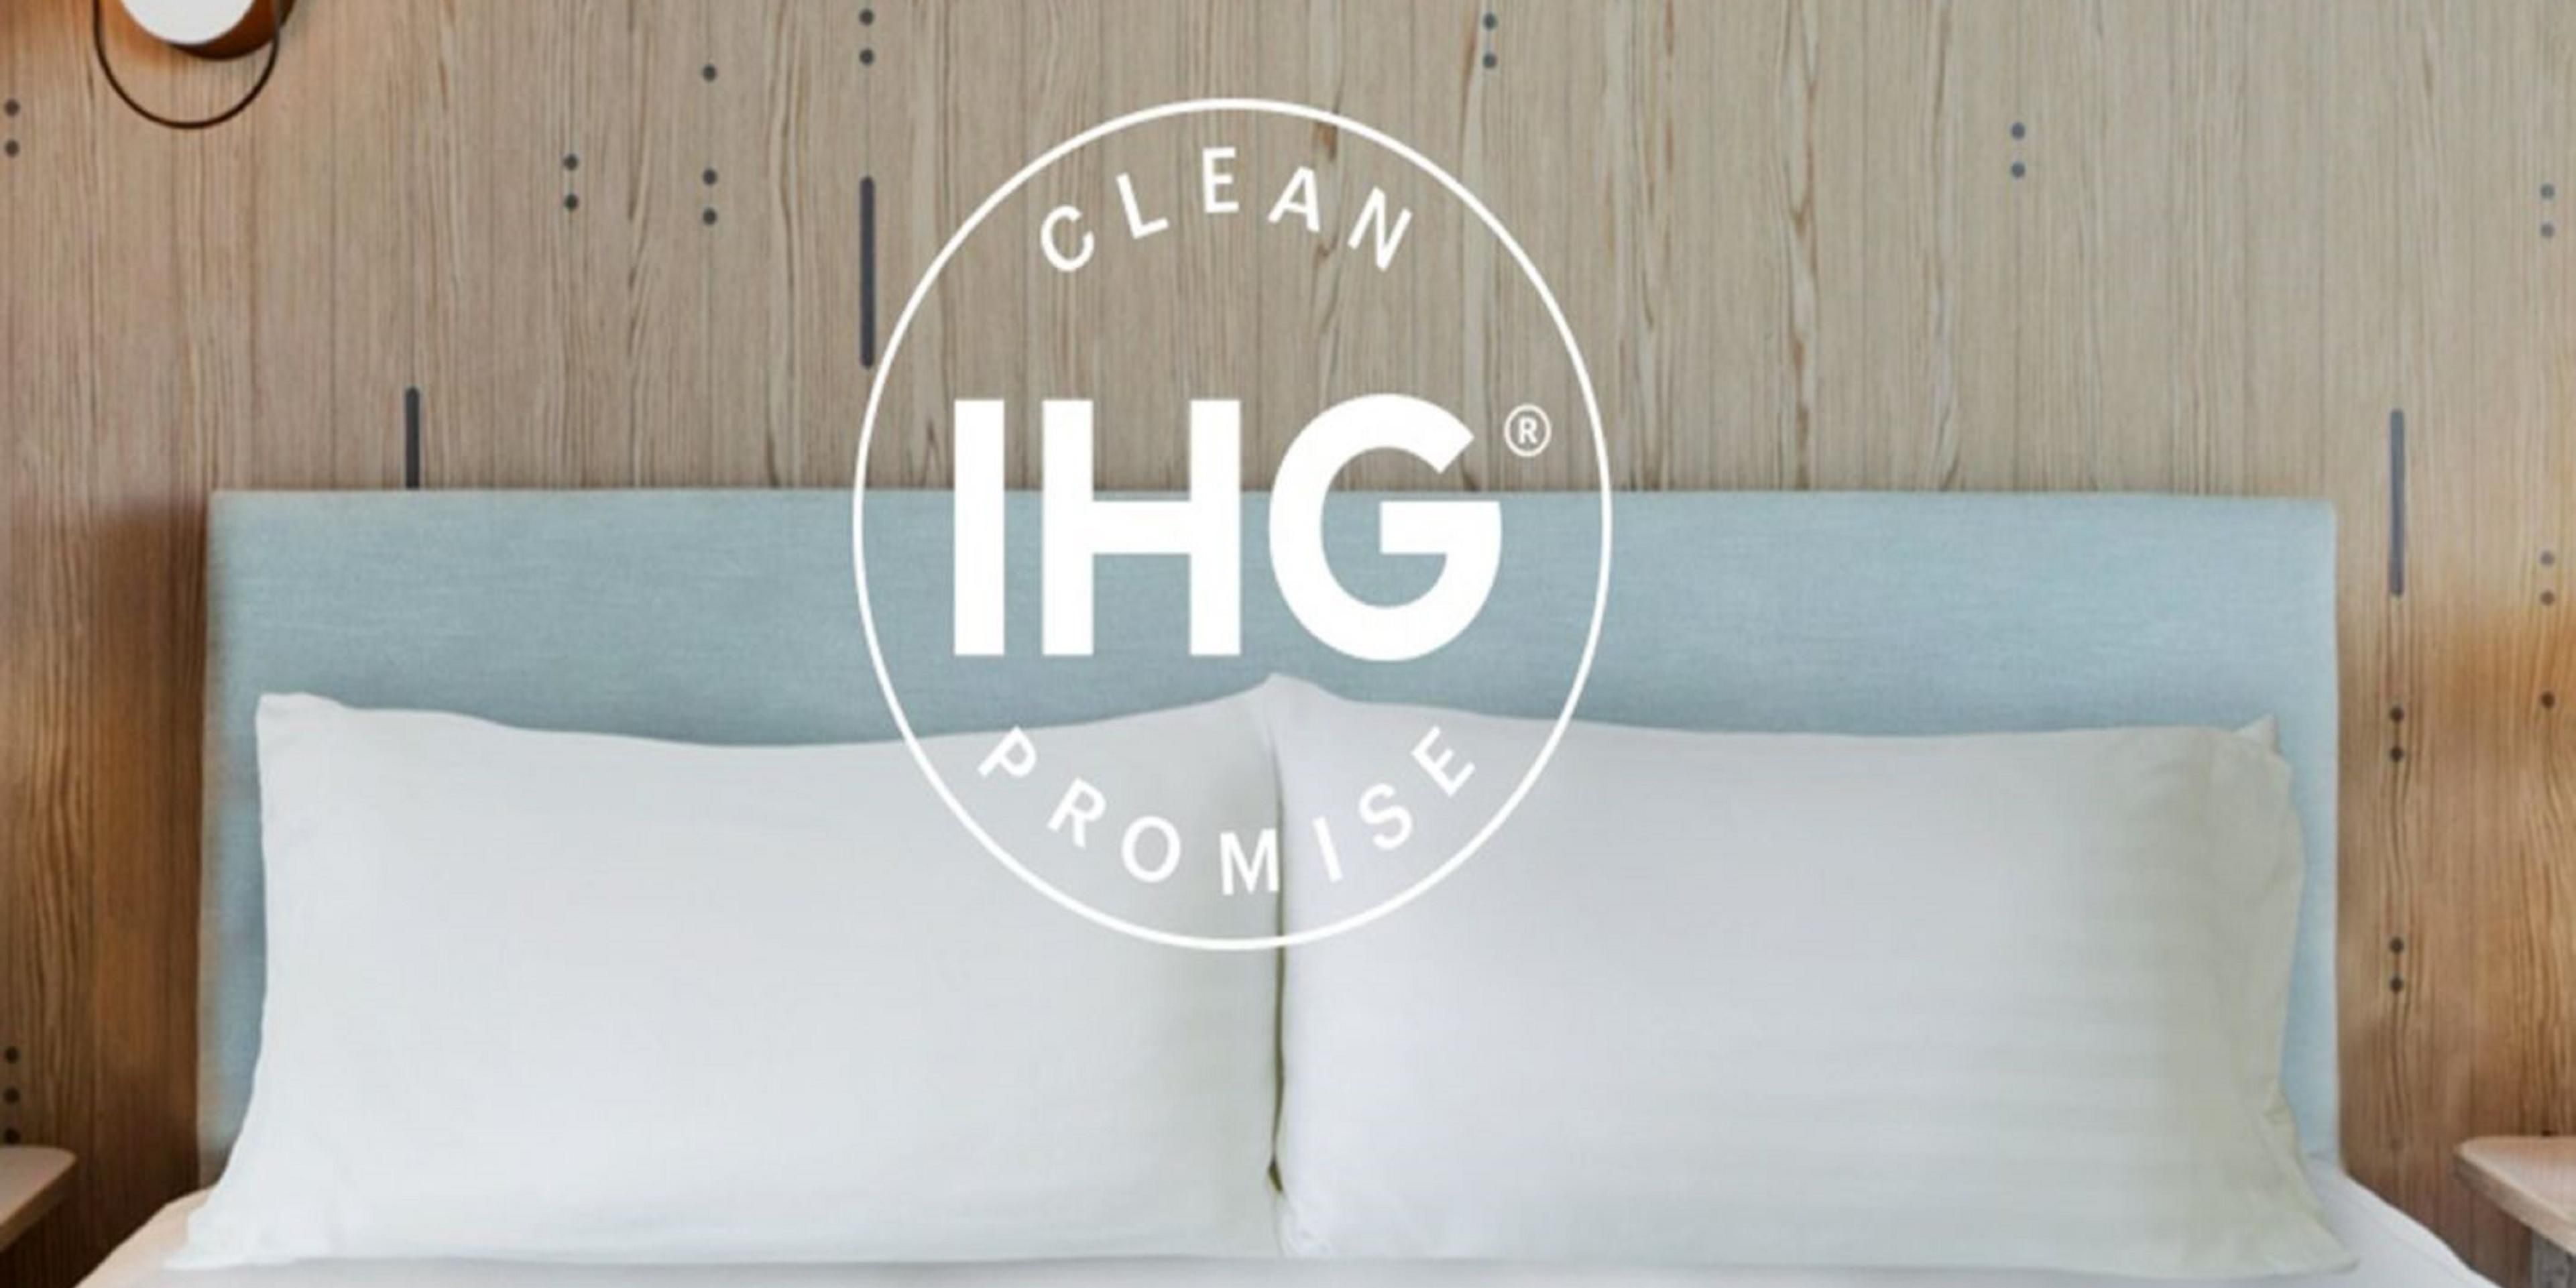 When you're ready to travel again, we'll be ready to Welcome You! As the world adjusts to new travel norms and expectations, we're enhancing the experience for you by redefining cleanliness and supporting your wellbeing throughout your stay! We're committed to high levels of cleanliness.